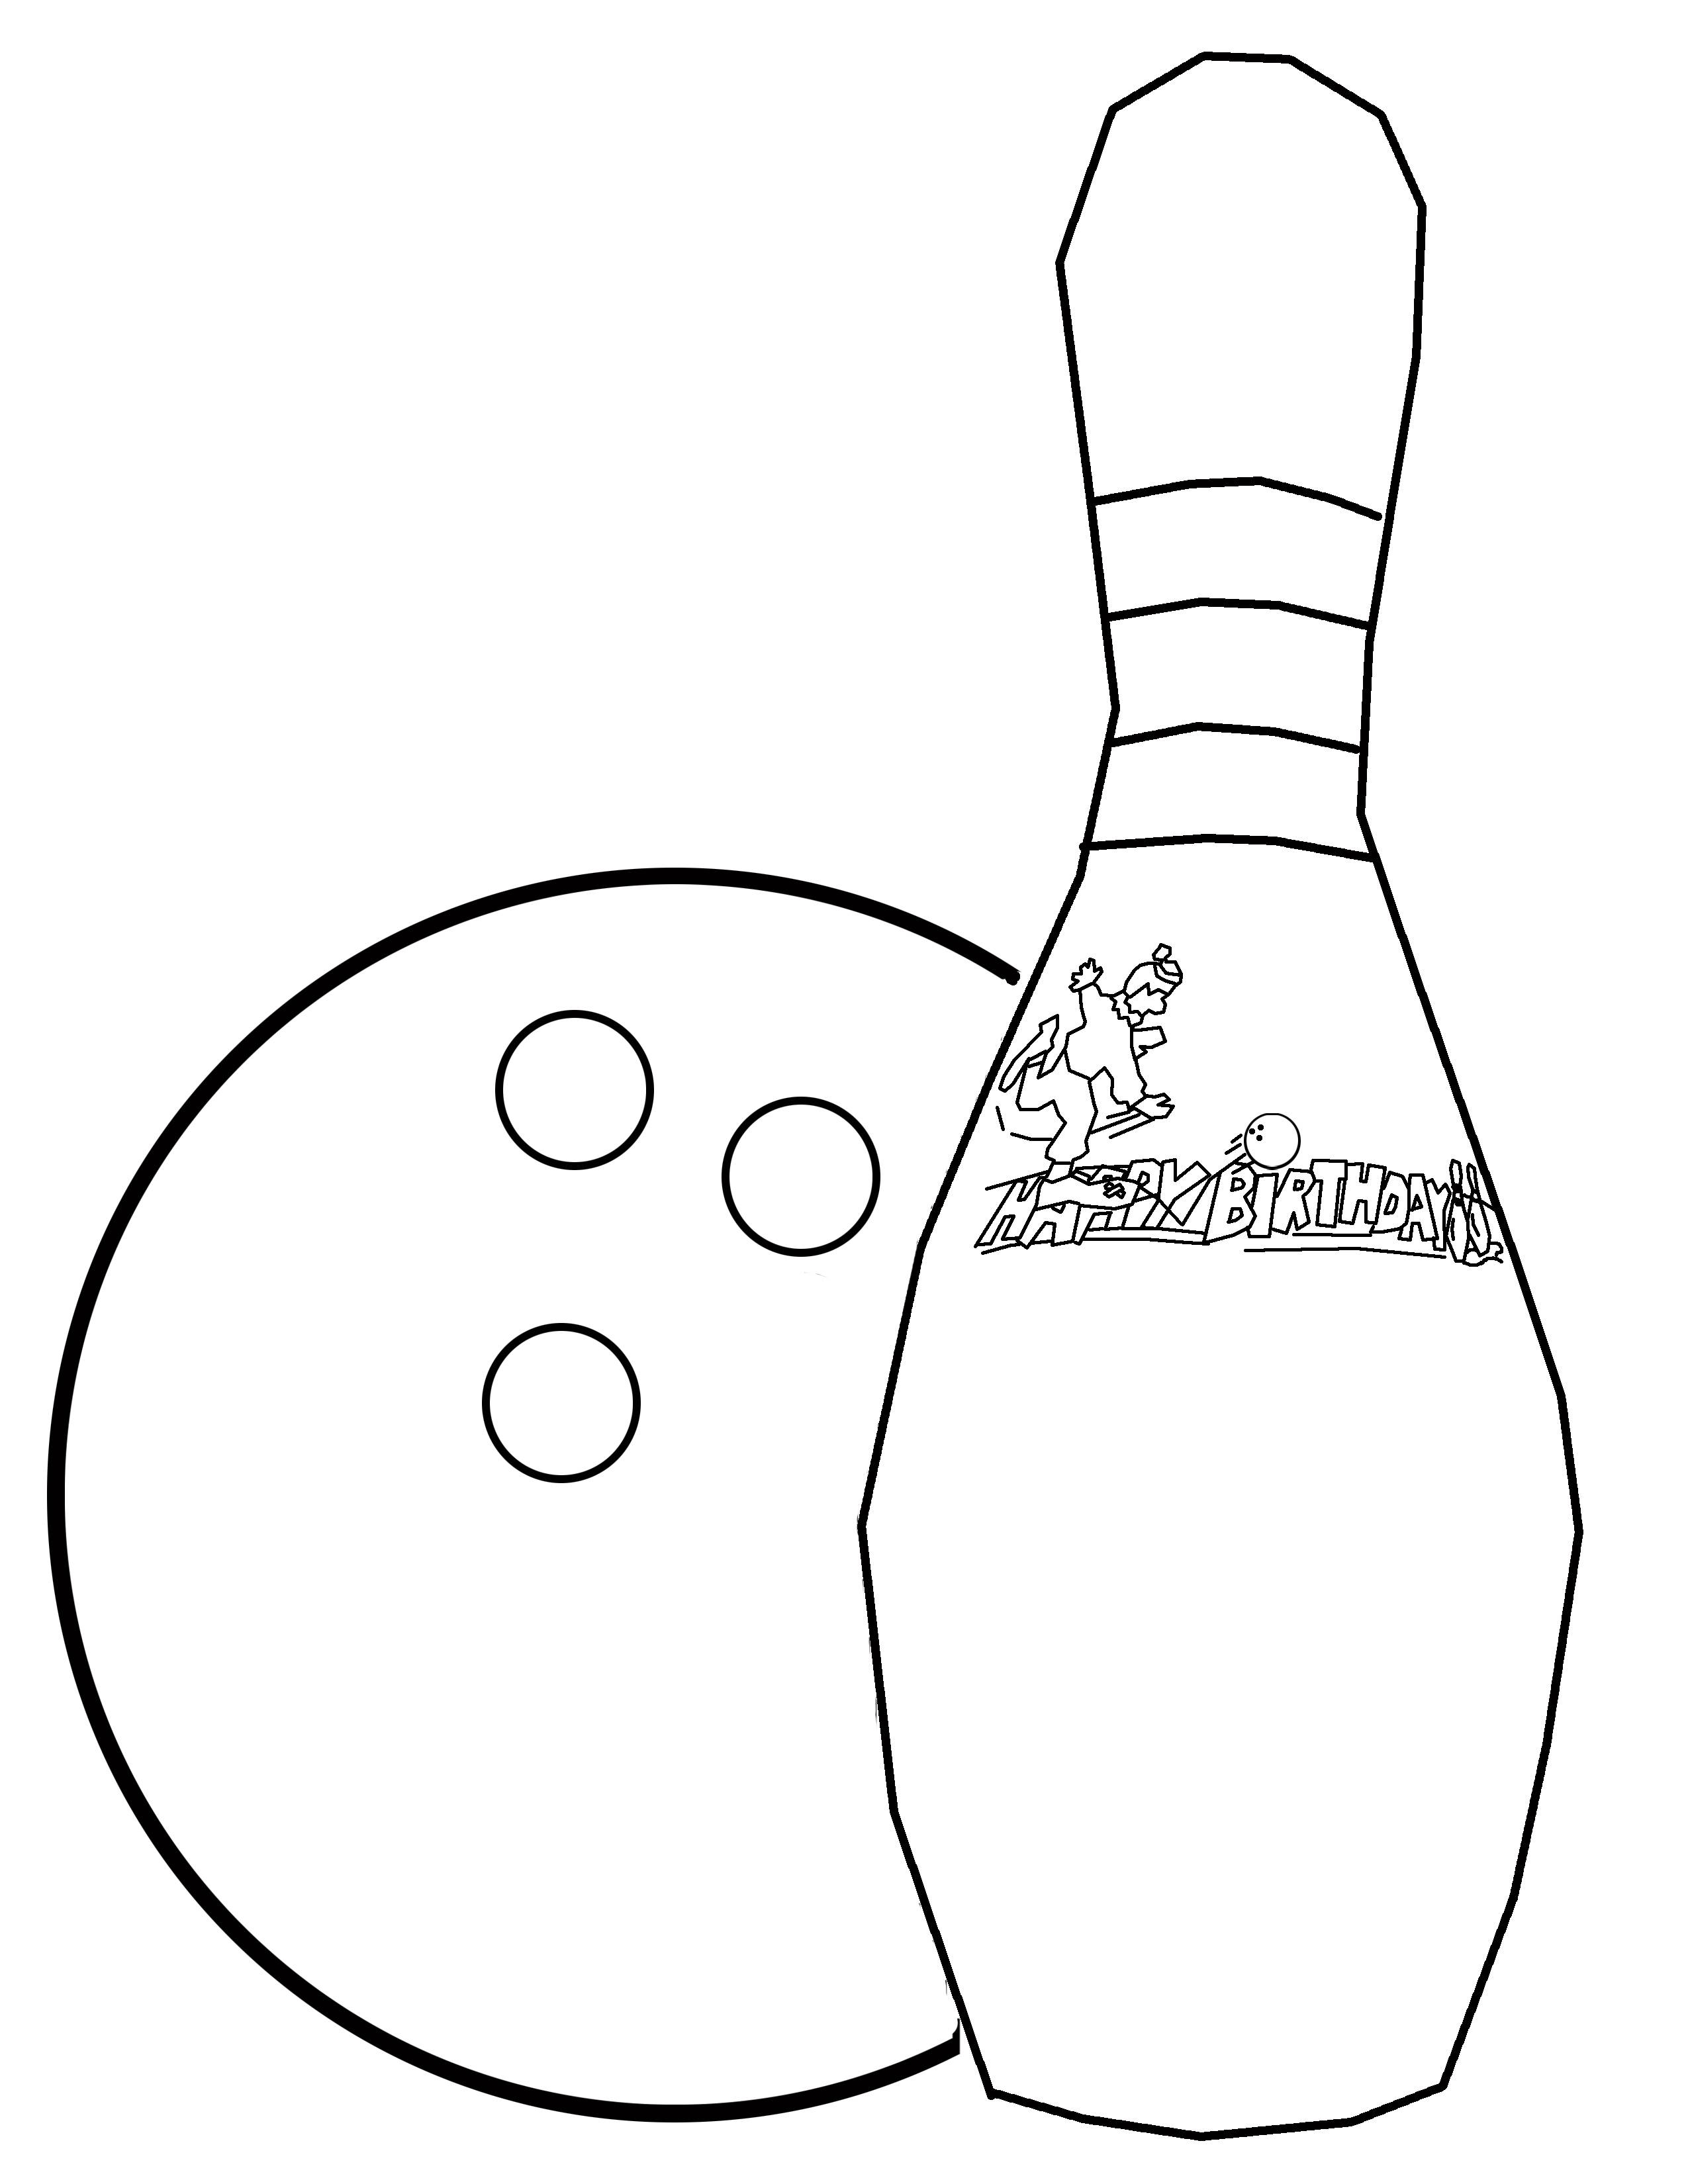 Bowling Pins Coloring Pages | Tasty Pizza Coloring Pages Of Food ...